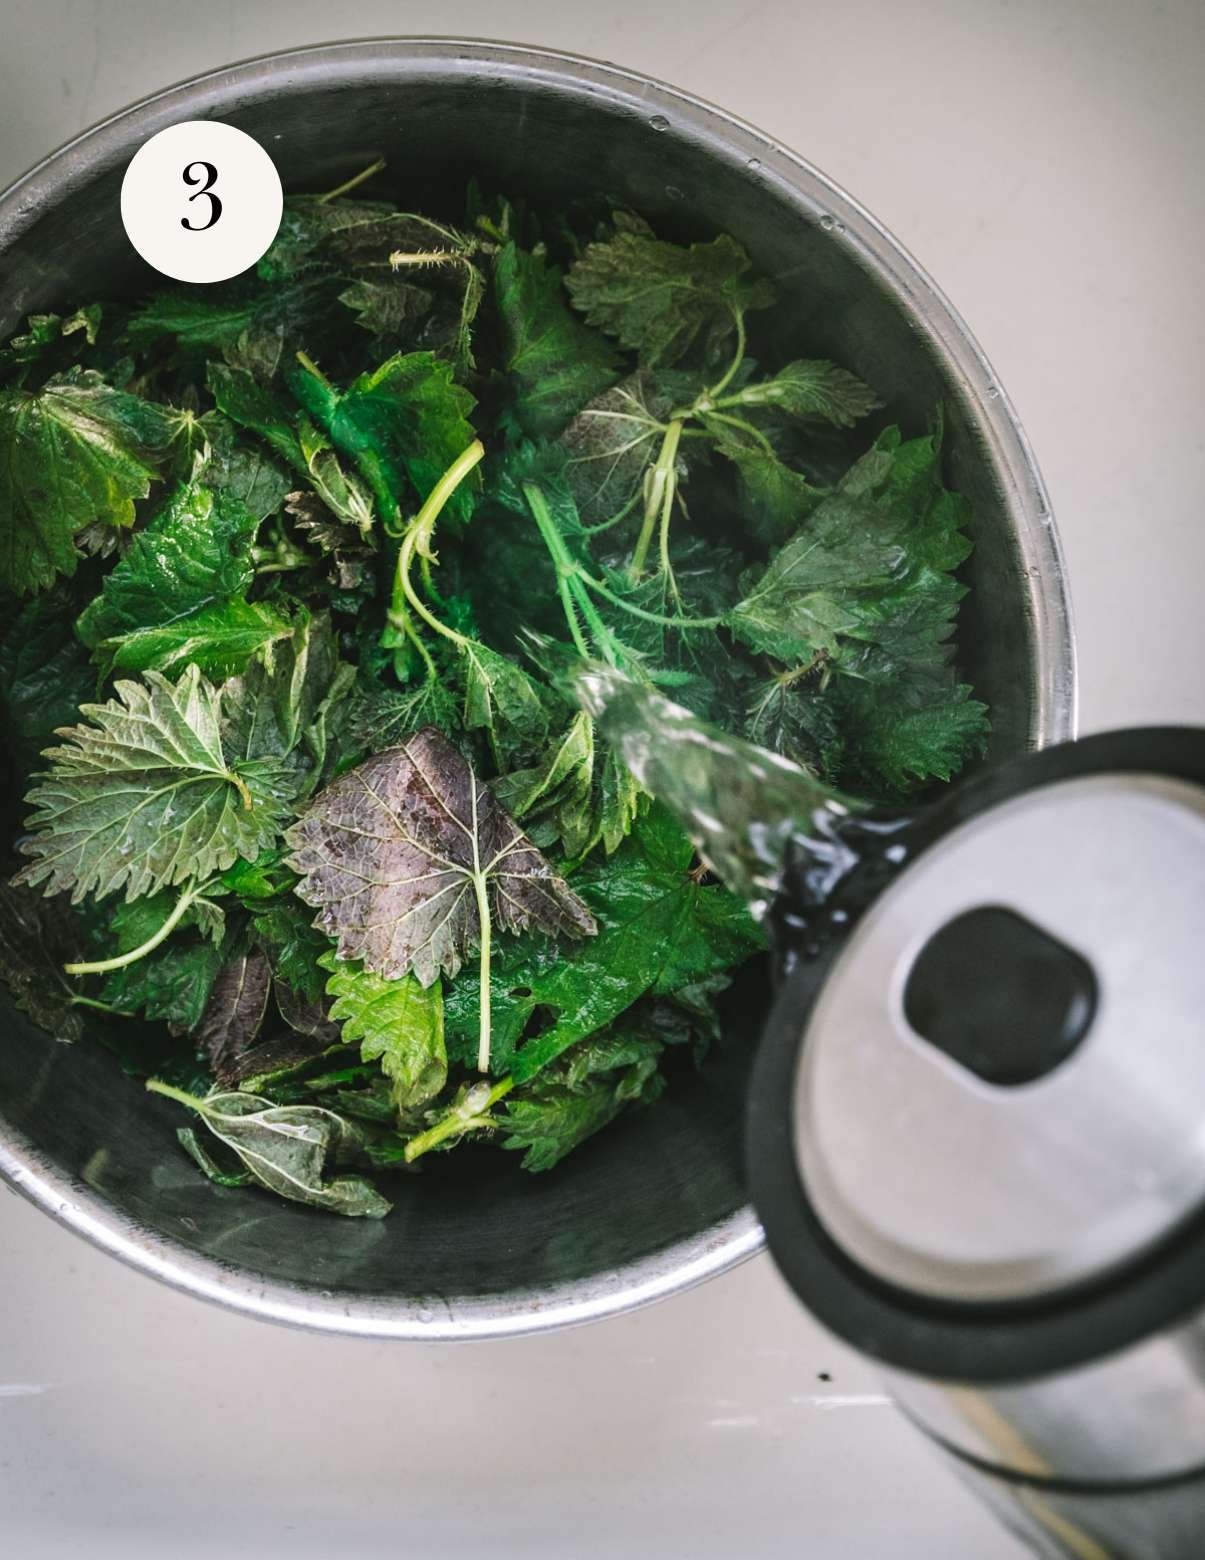 Pouring boiling water over stinging nettles.